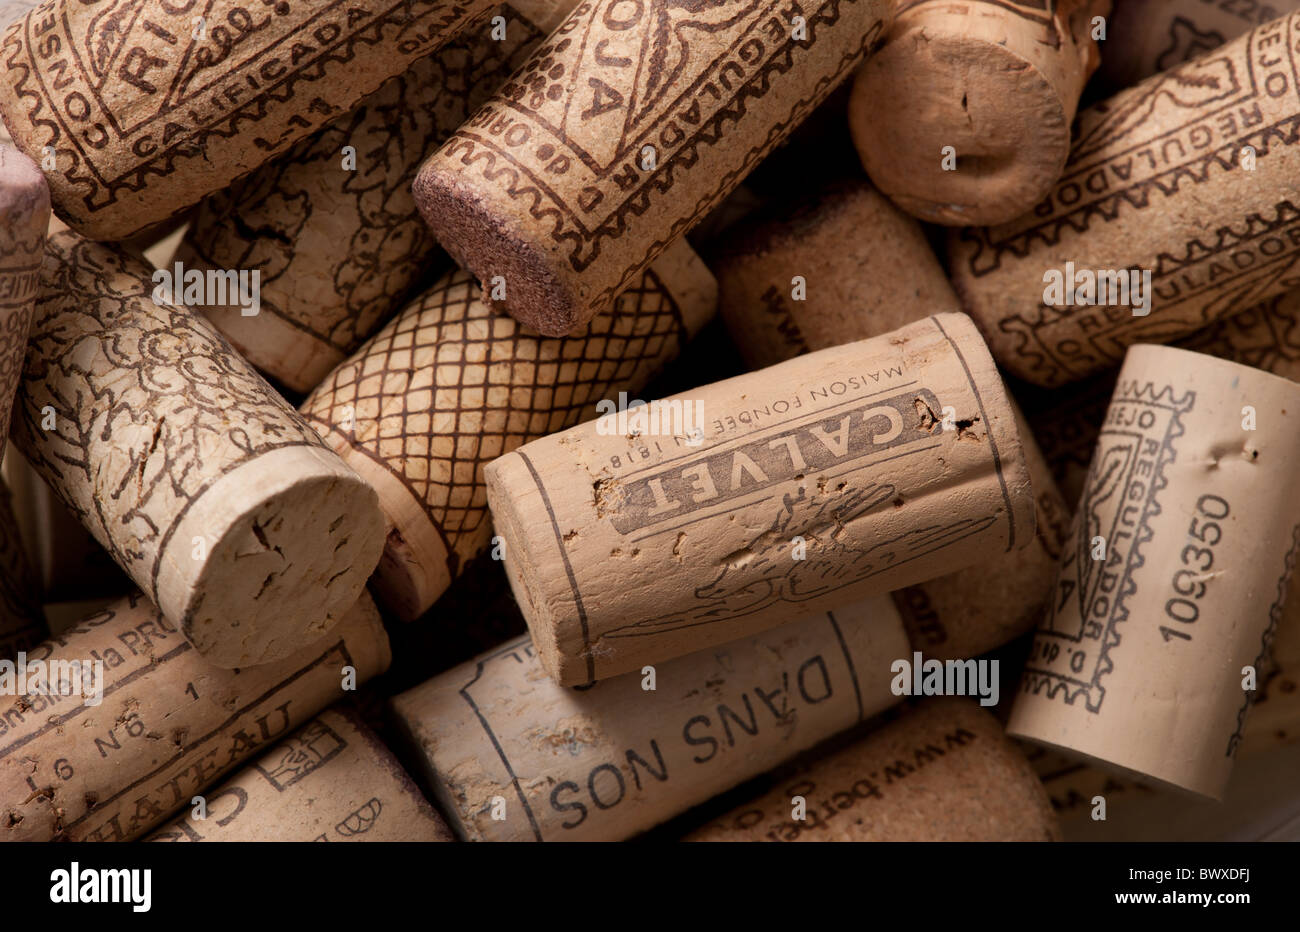 A collection of used wine corks Stock Photo